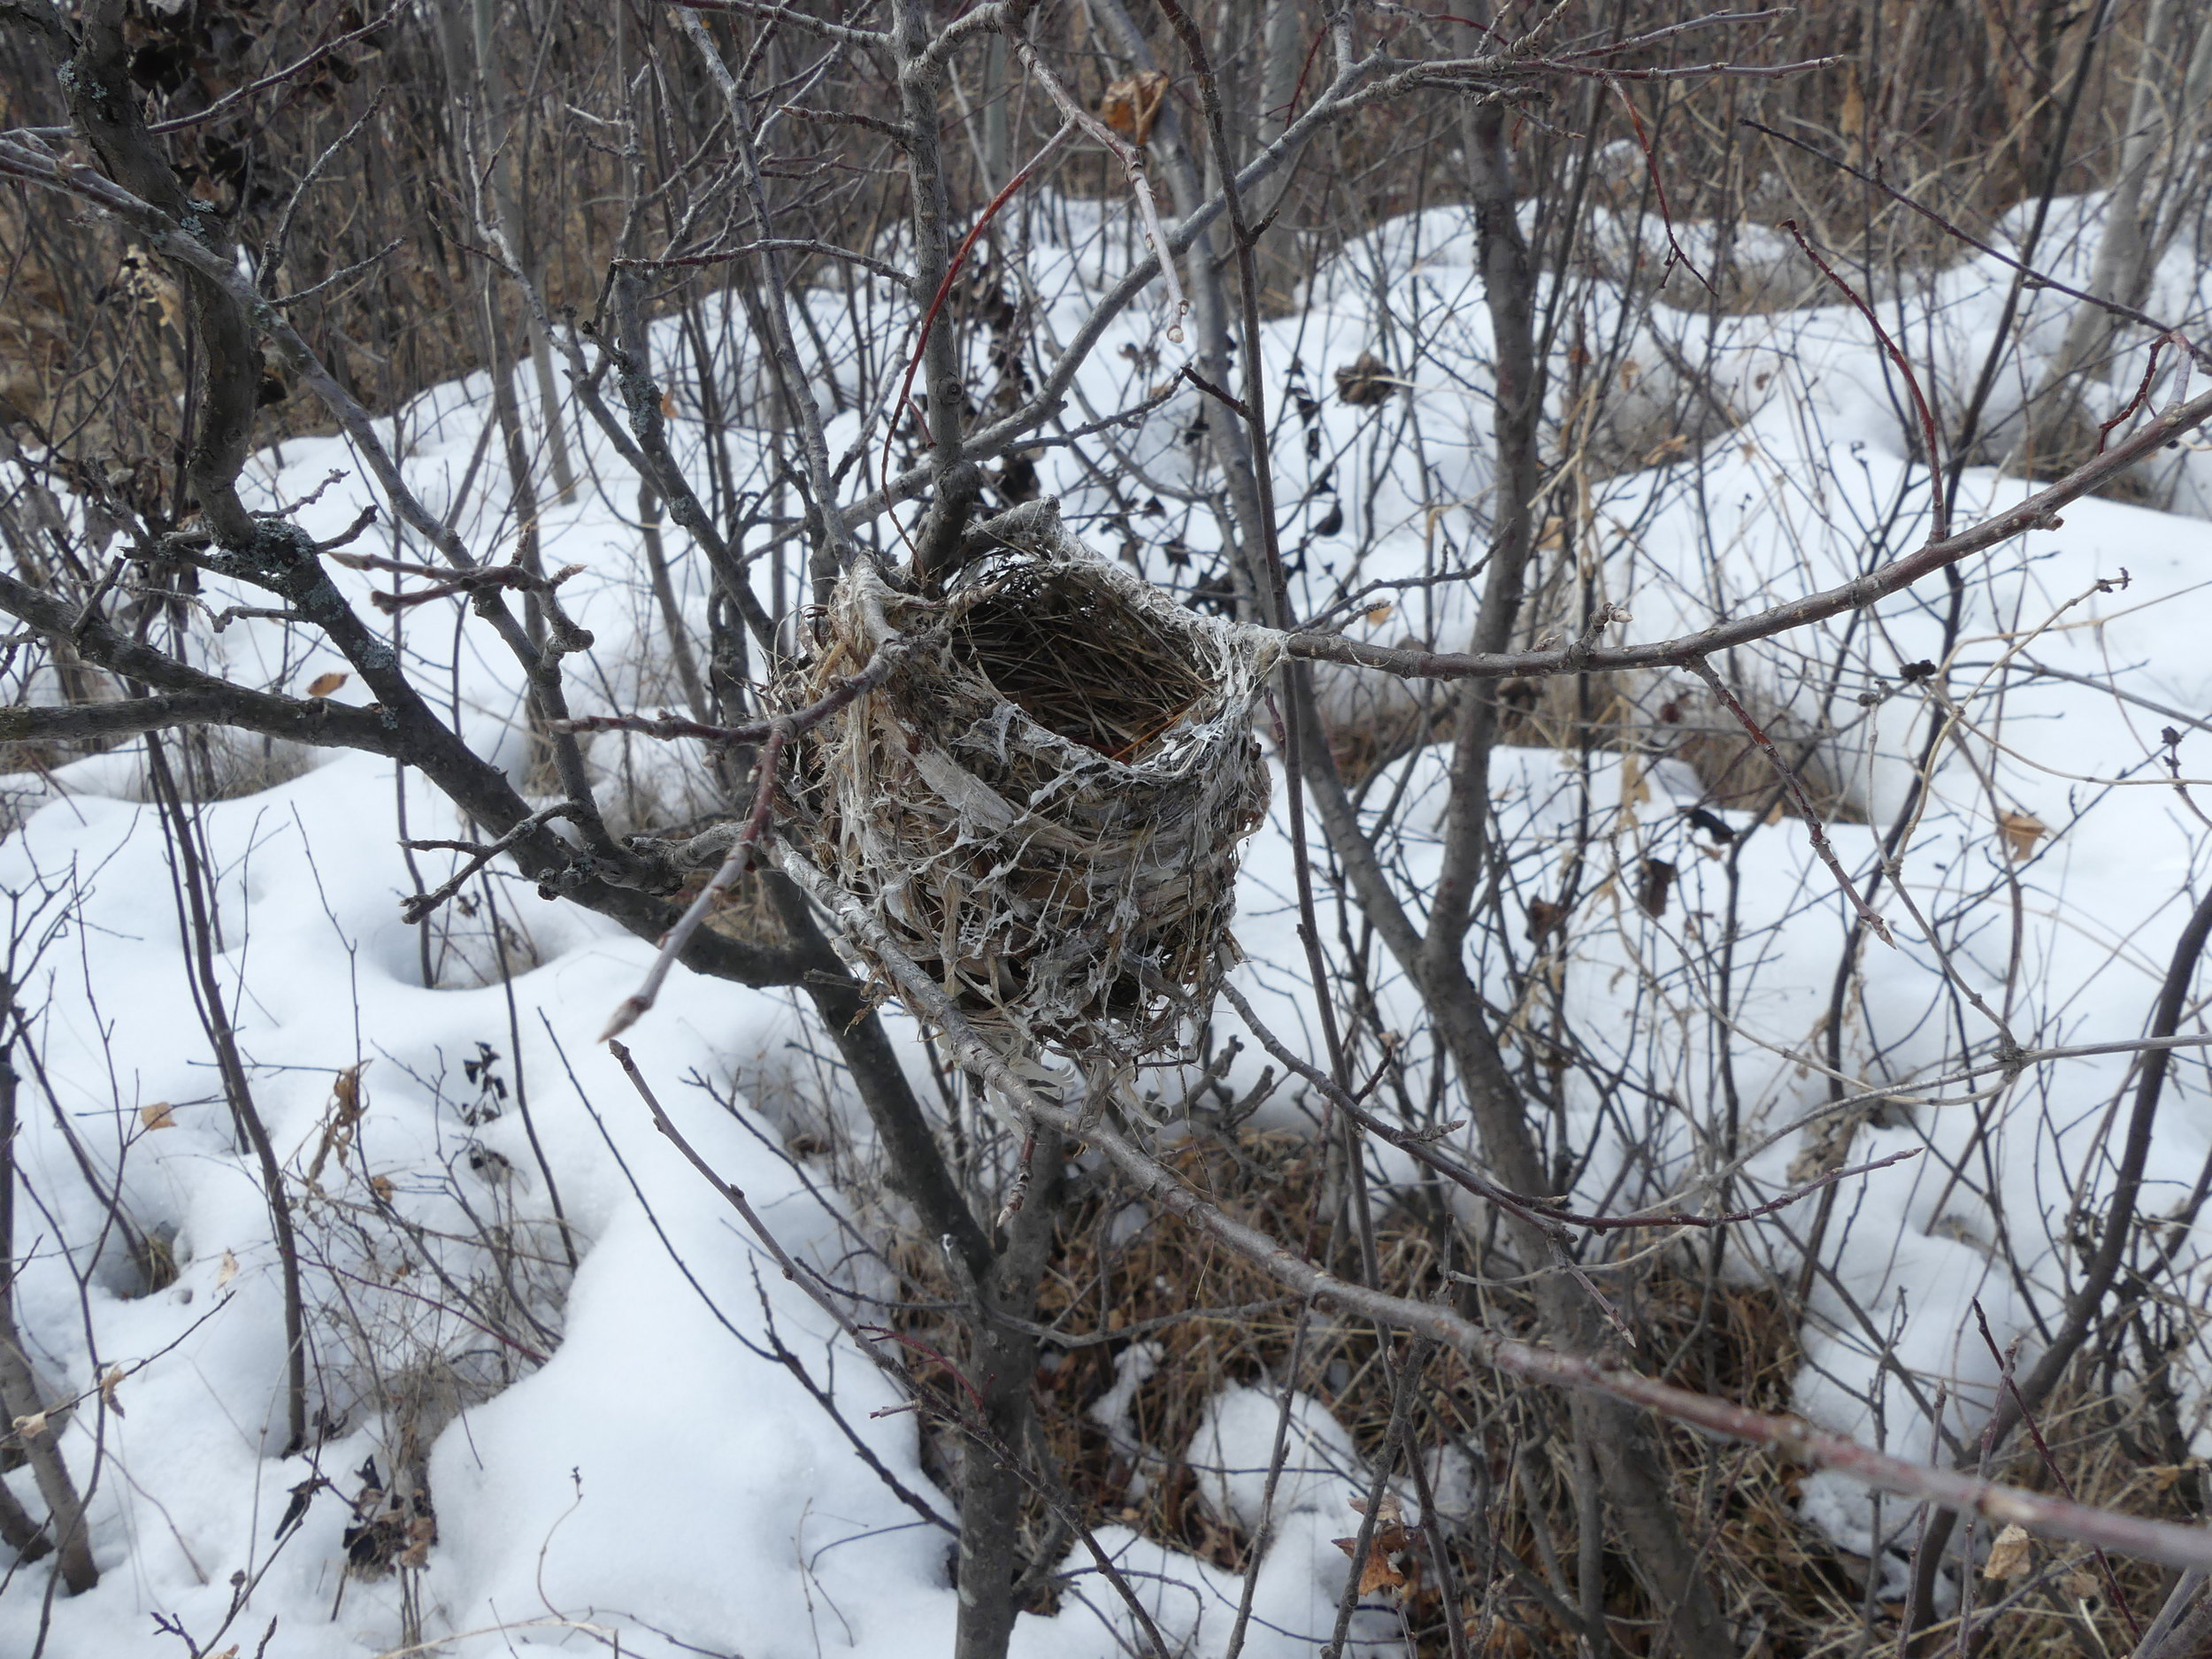 An old Warbling Vireo nest was found by volunteers at Pipestone Creek